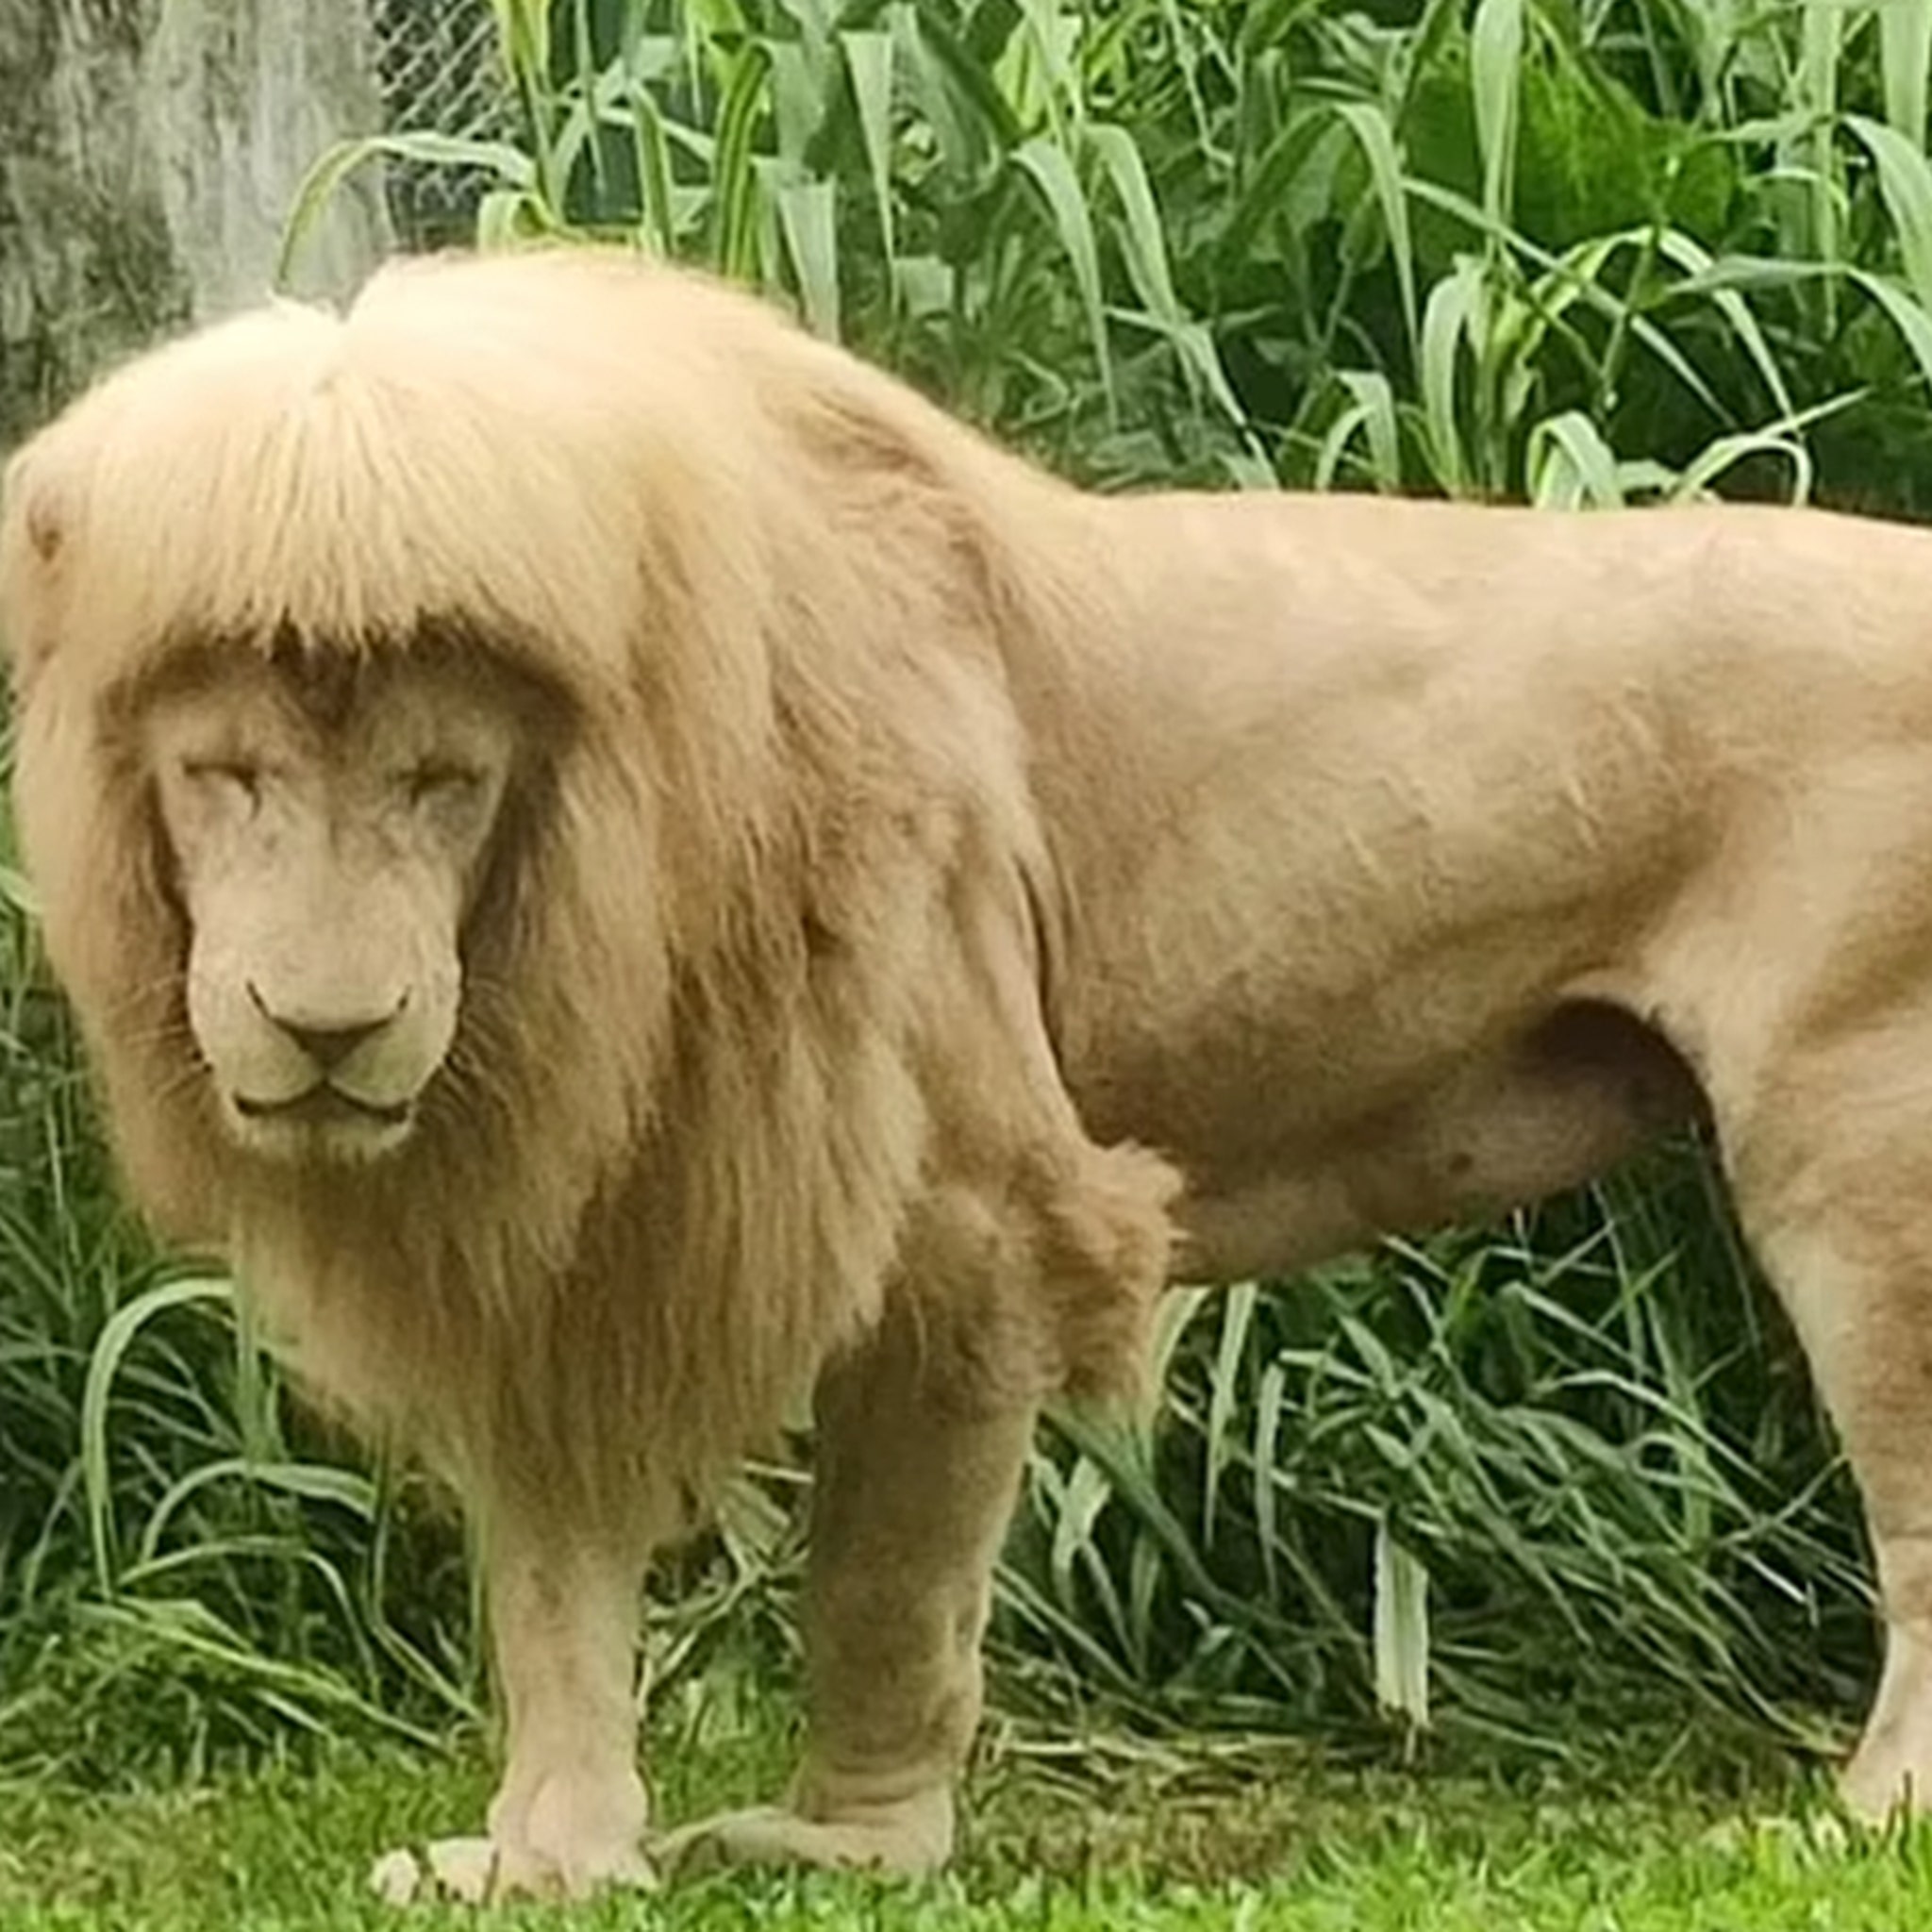 Lion with Mullet Causes Uproar in China, Zoo Denies Giving Botched Haircut